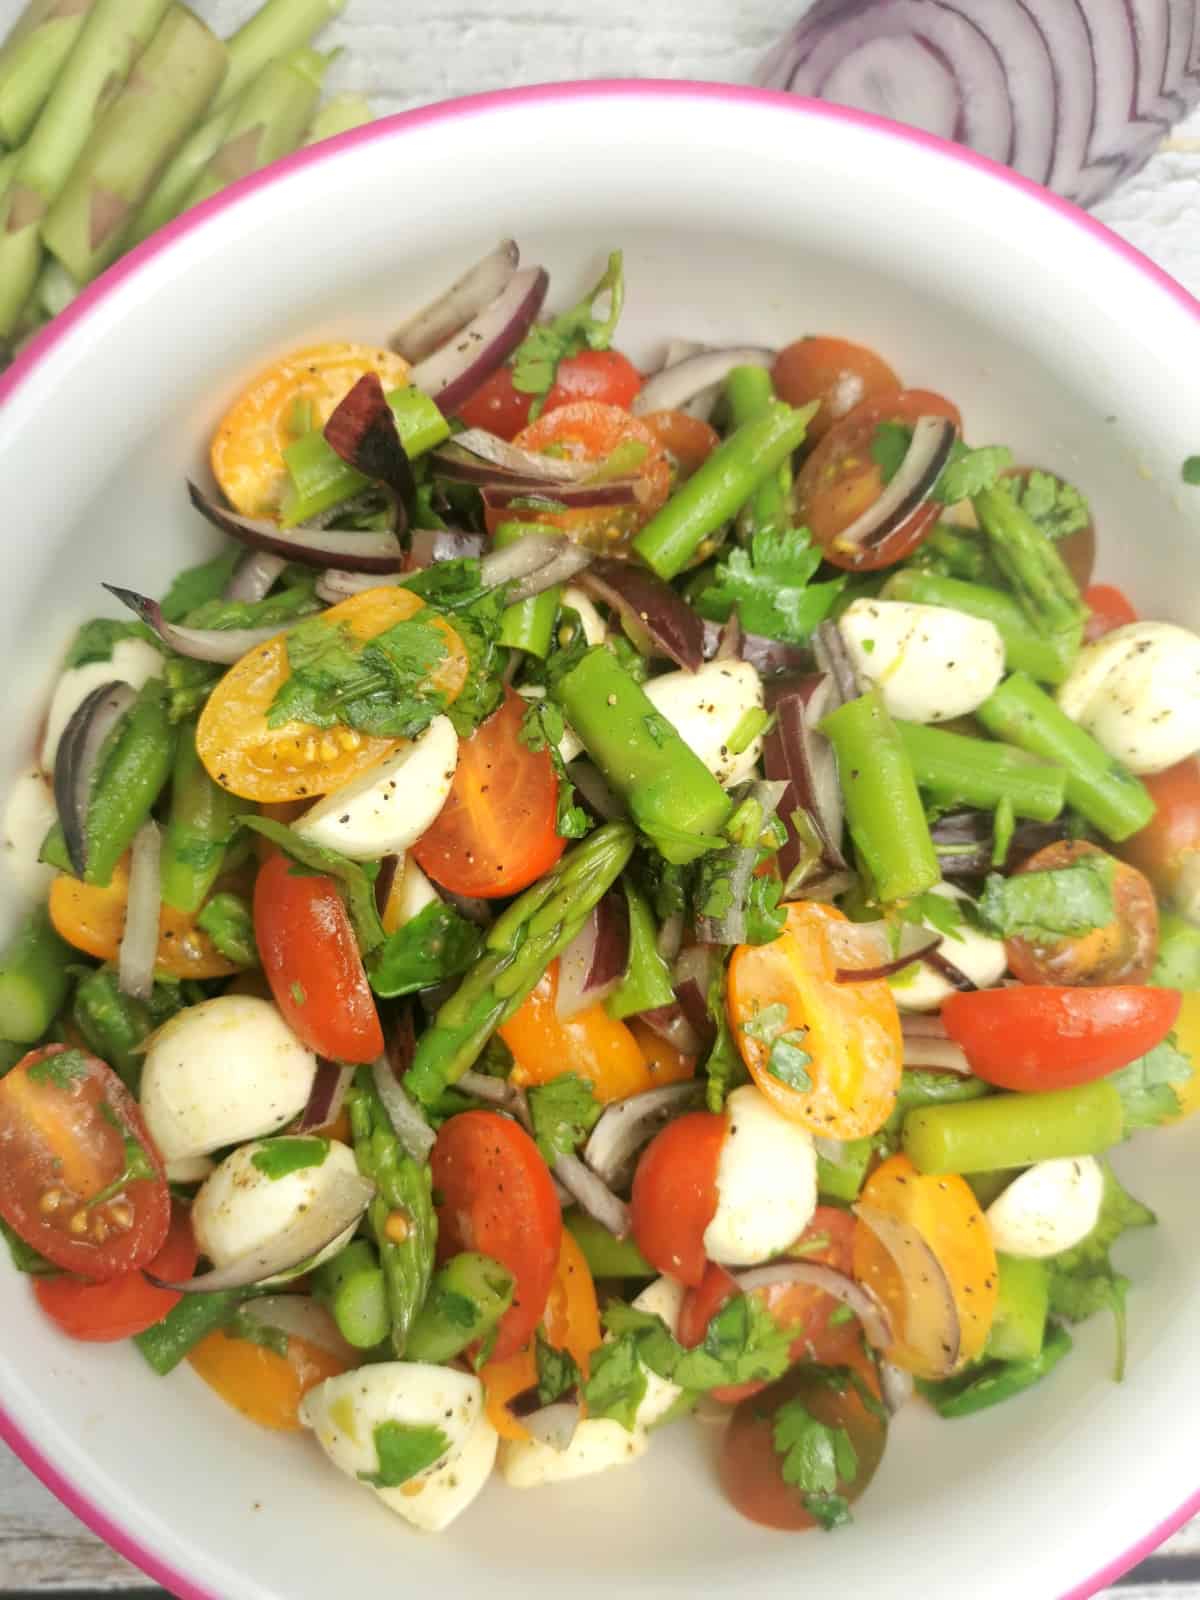 Image of Cherry Tomato and Asparagus Salad.